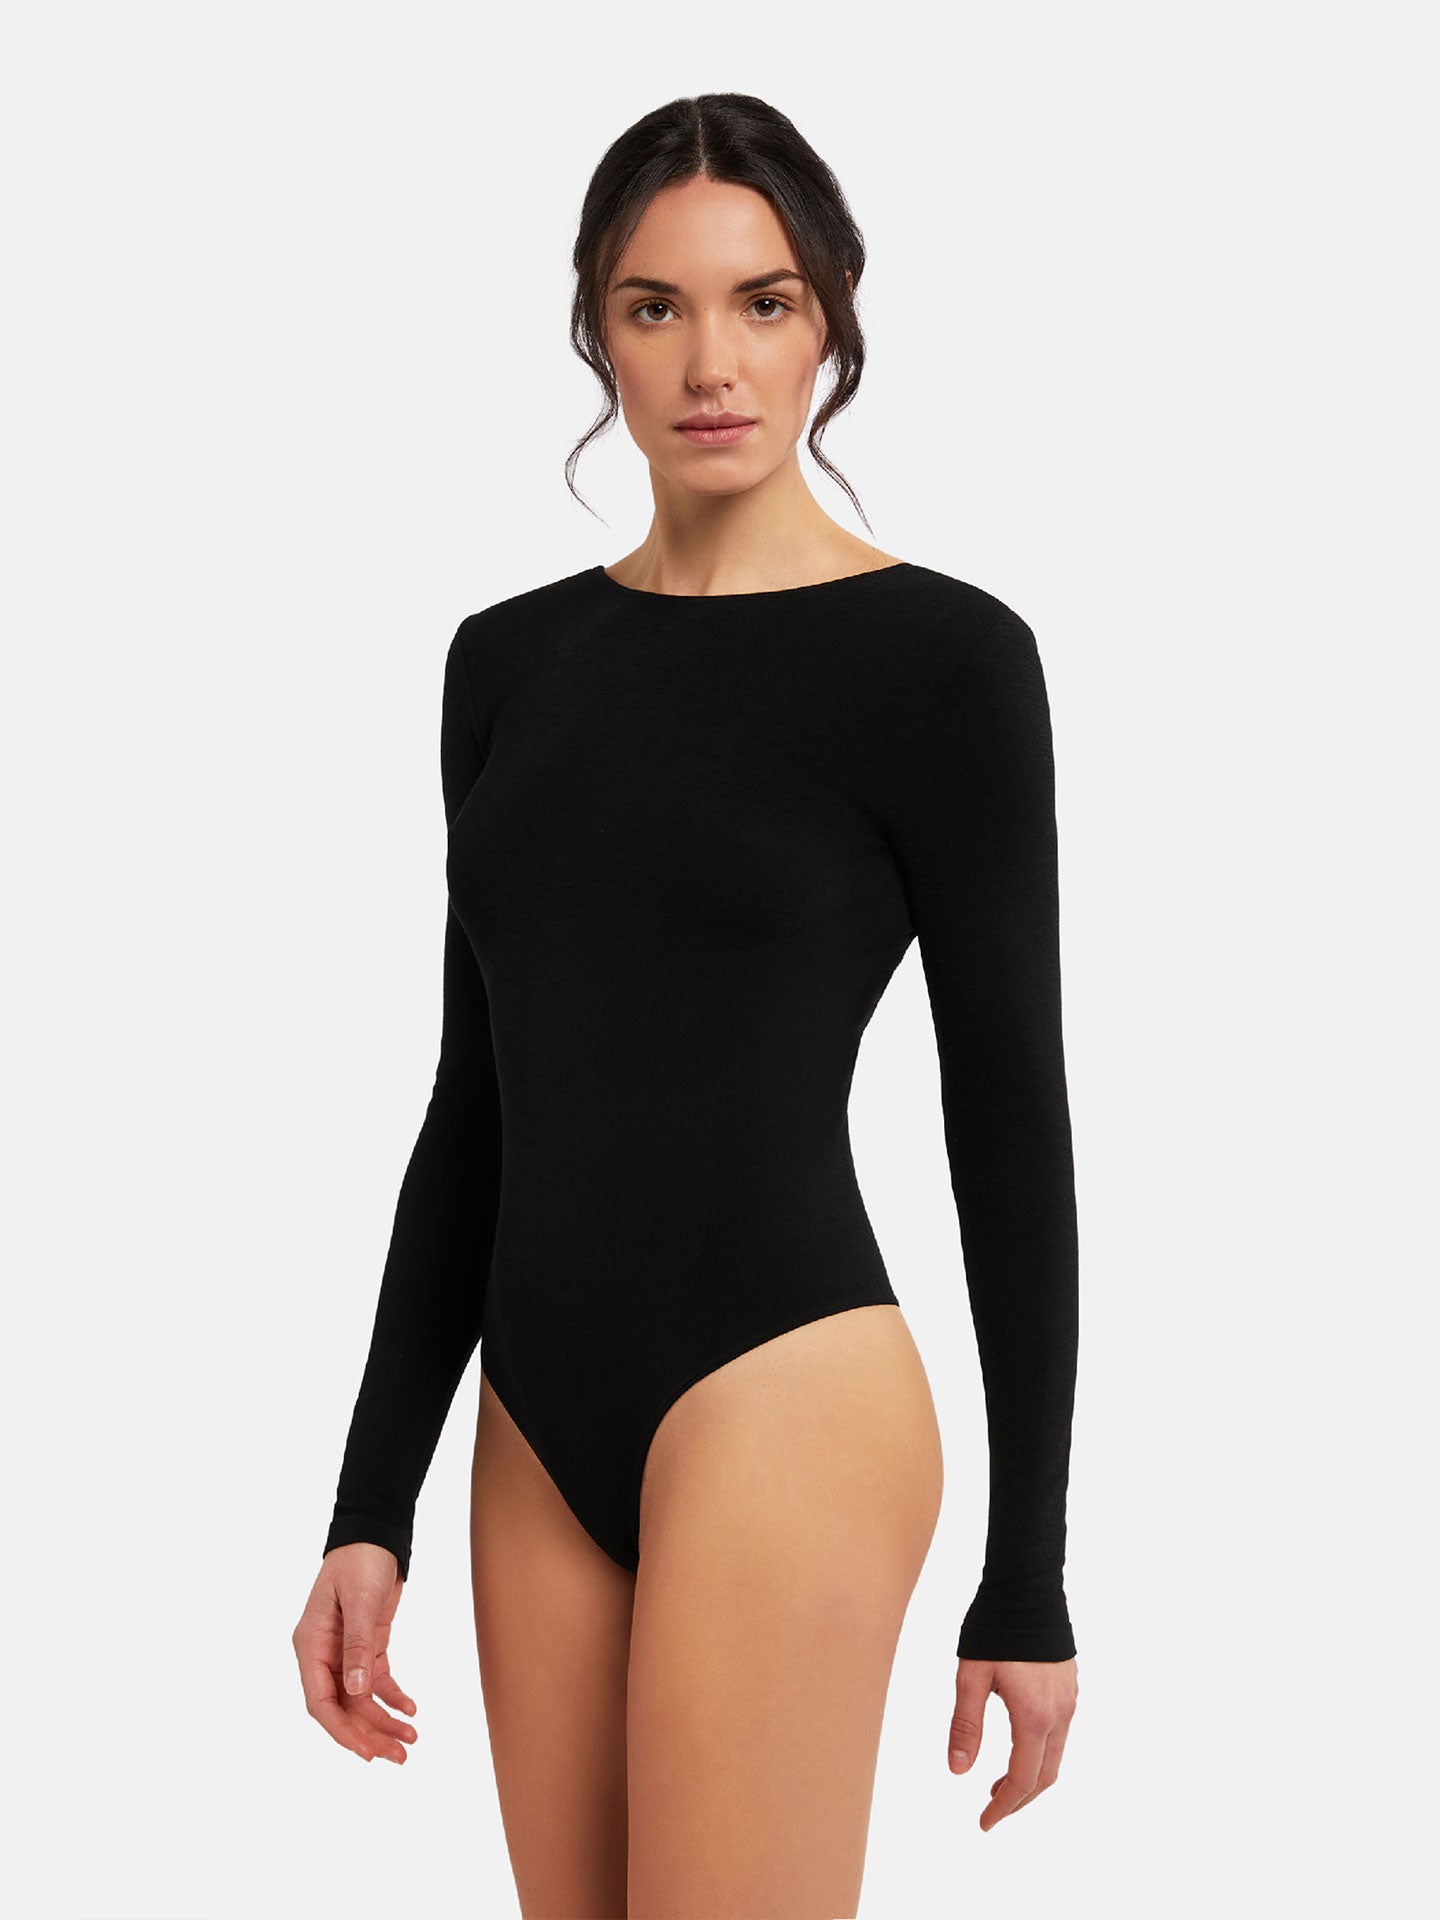 Wolford Black Body Lines Bodysuit Wolford